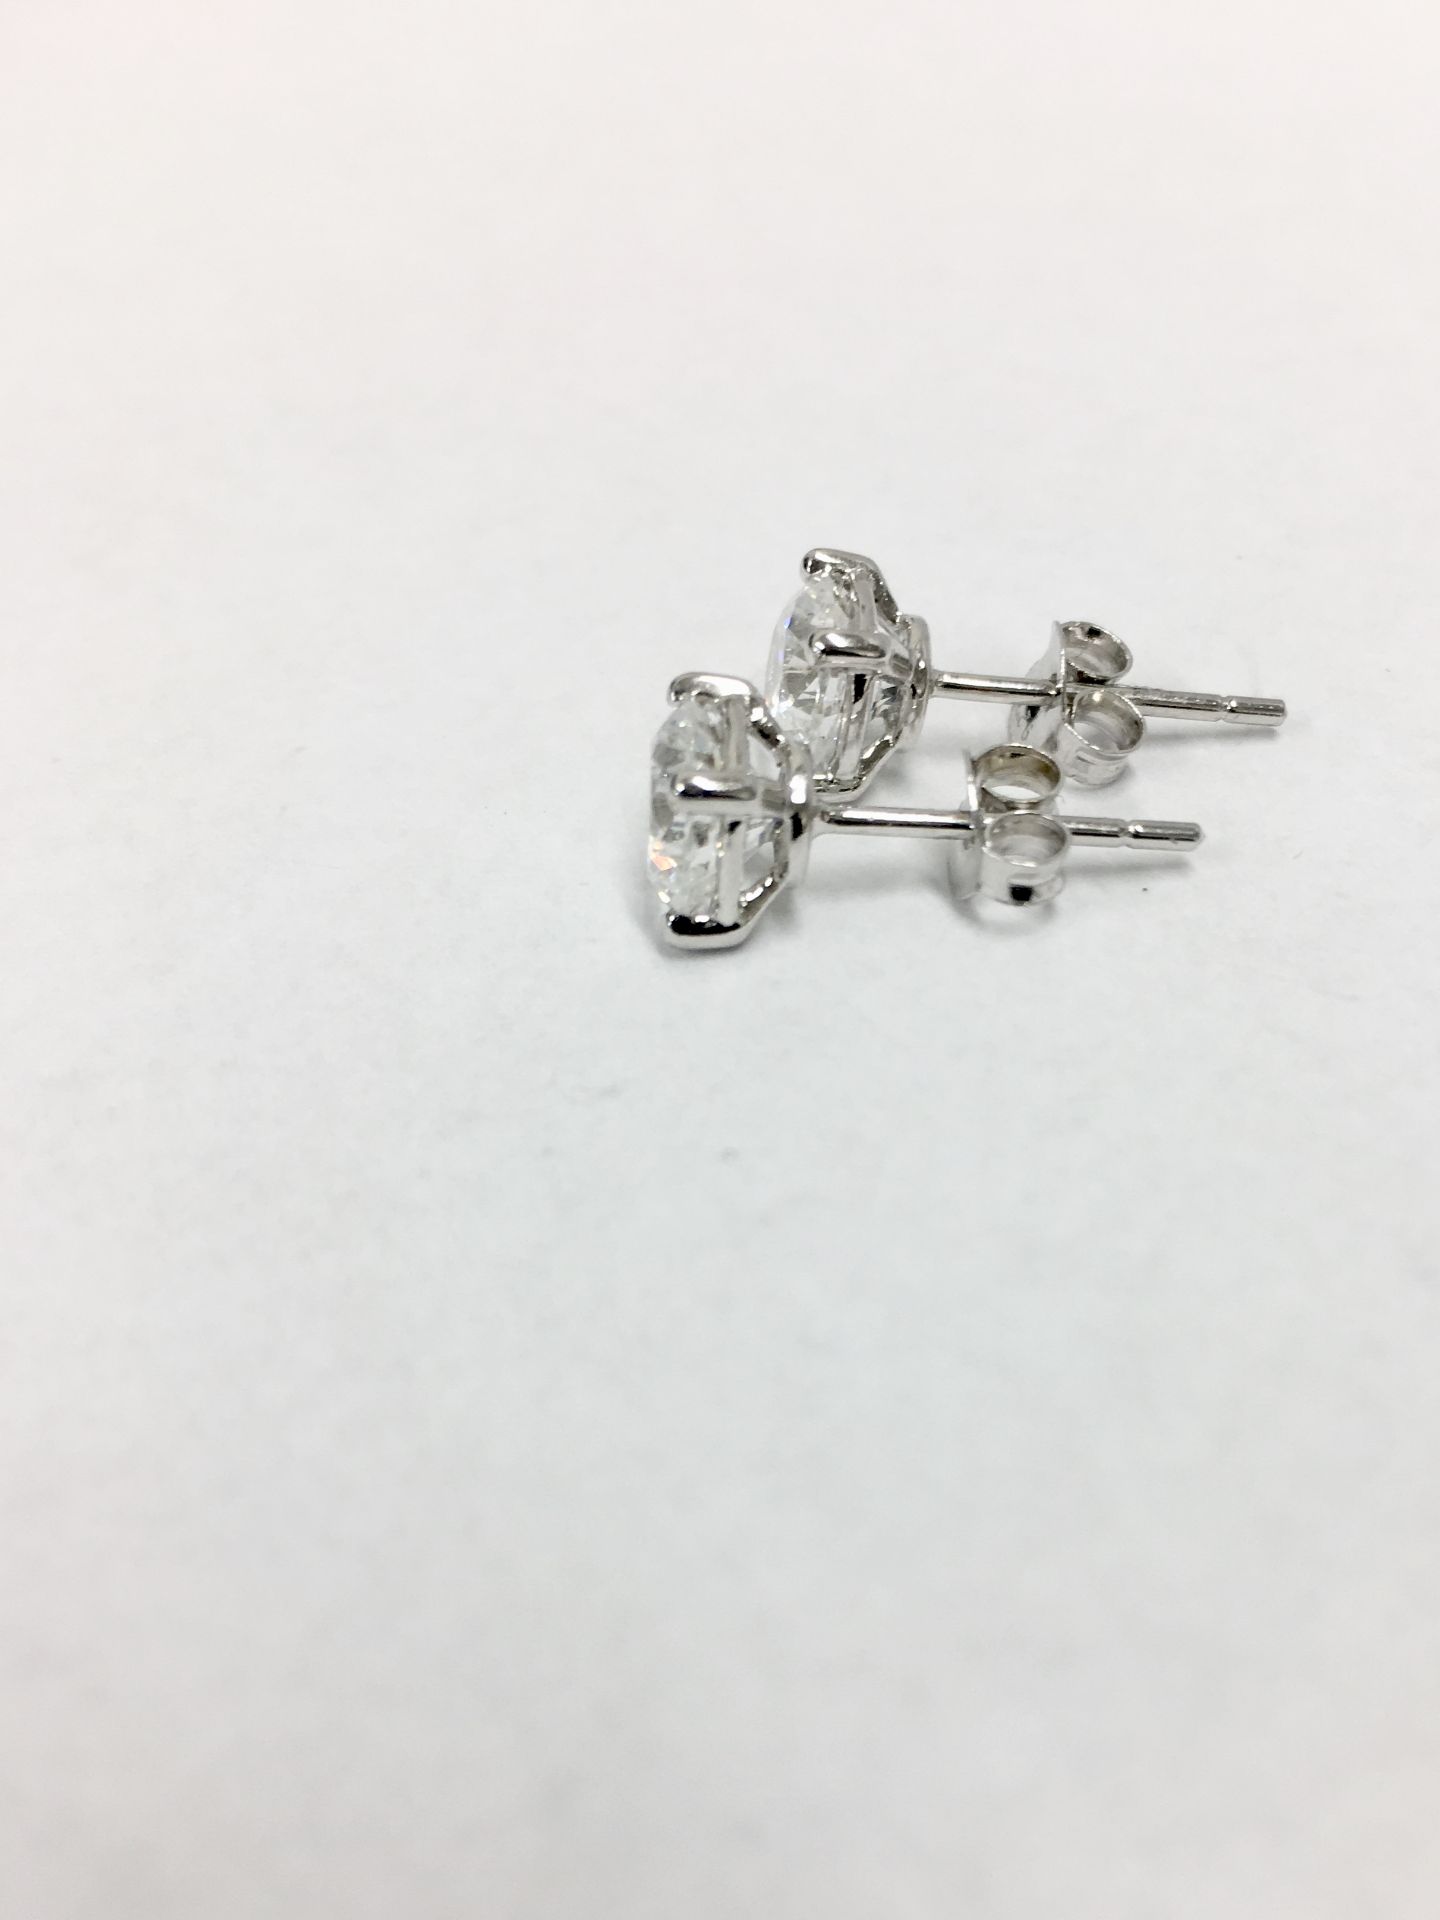 1.20Ct Diamond Solitaire Earrings Set In 18Ct White Gold. - Image 7 of 12